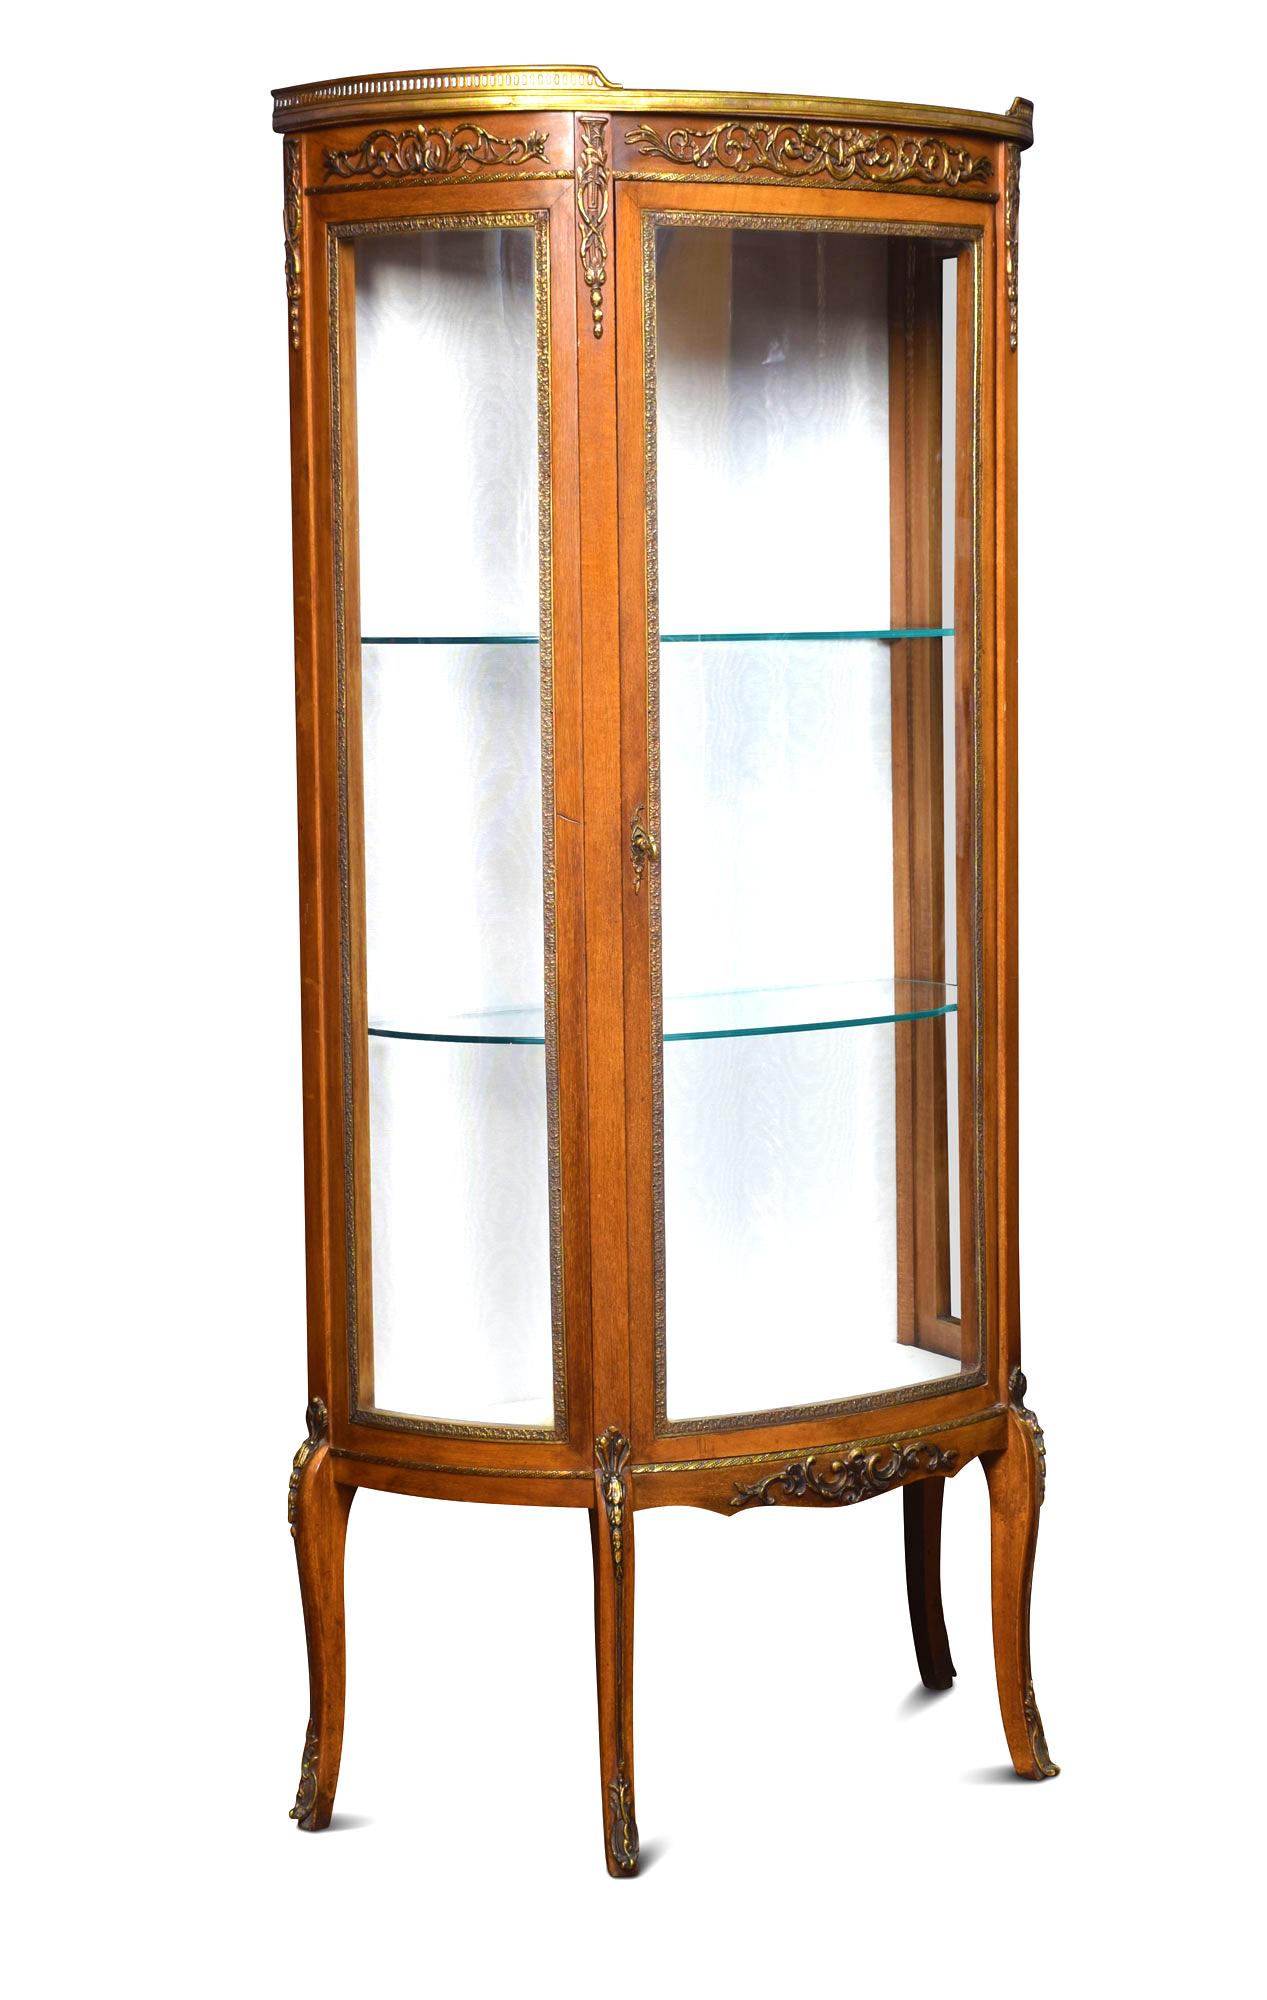 Walnut display cabinet, the marble top with raised three quarter ormolu gallery Above glass sides and bow fronted door enclosing two glazed shelves, all raised on elegantly curved legs with ormolu sabots.
Dimensions:
Height 55 inches
Width 26